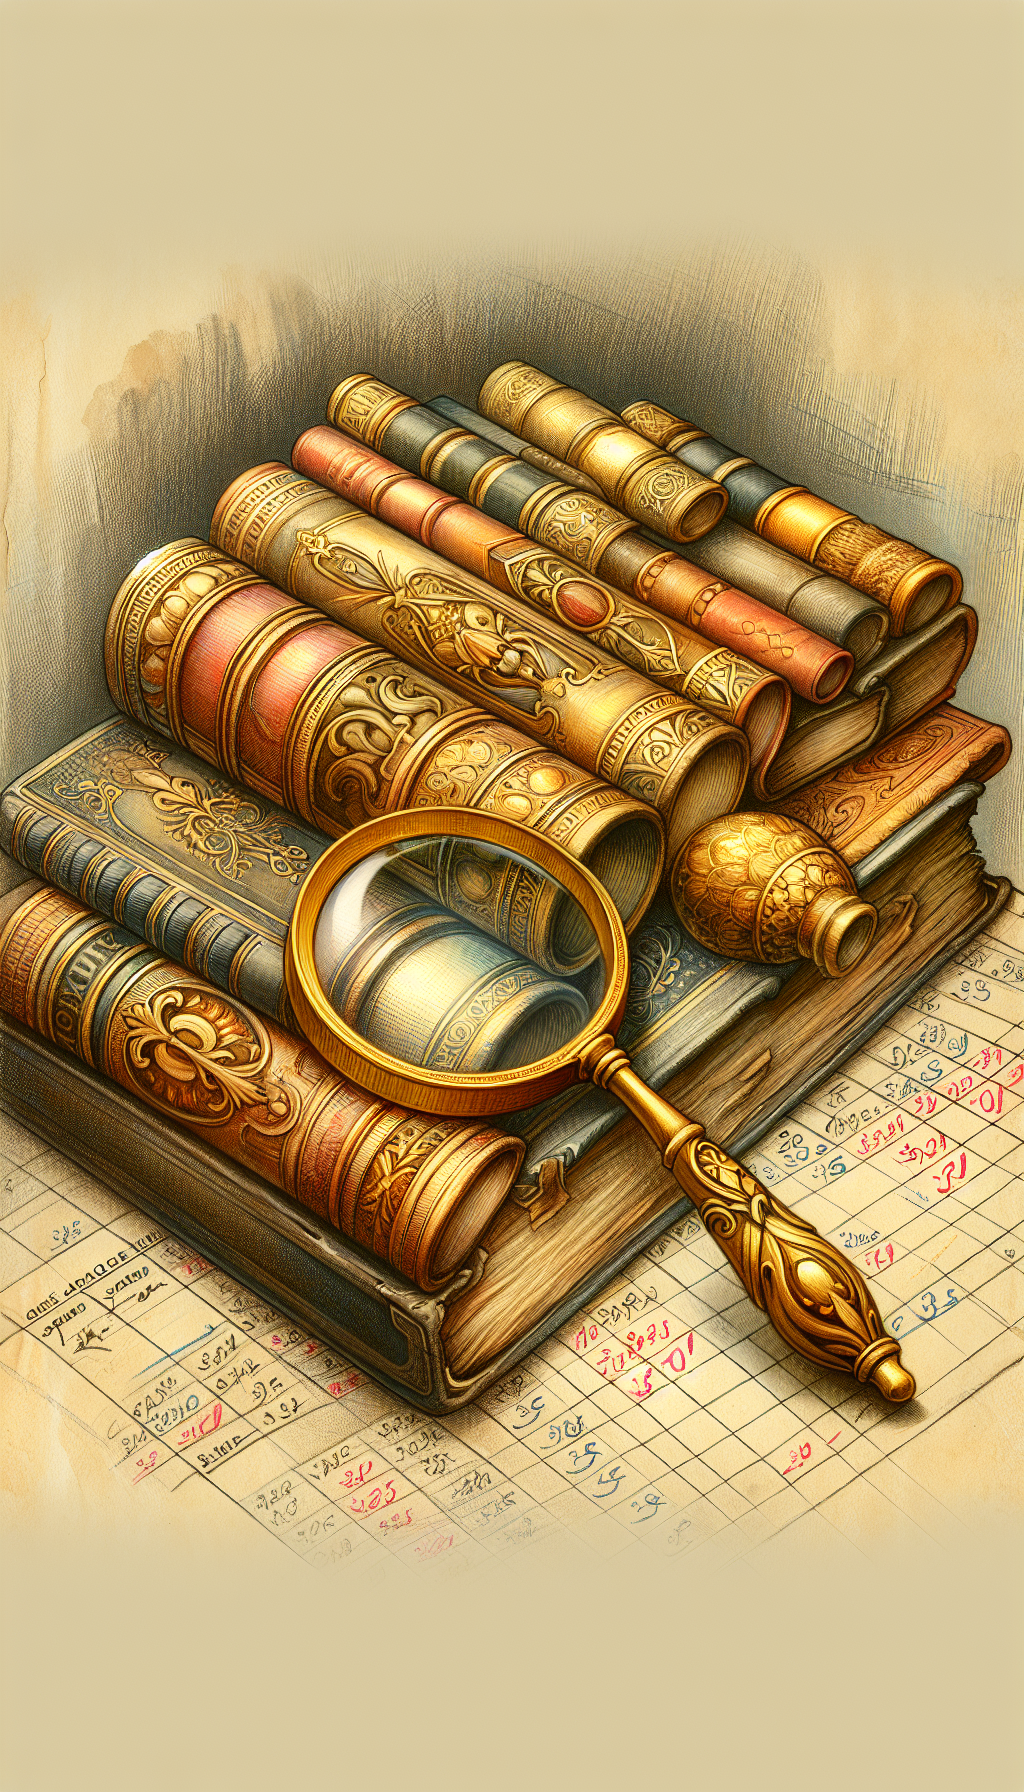 A whimsical still-life-style illustration depicting a golden magnifying glass hovering over a collection of unique, antique books with embossed titles hinting at rarity. Each book shows faded colors and intricate designs, sitting atop an aged "Old Book Value Guide" ledger, with handwritten notes and dollar signs, constrasting in sketched graphite versus the full-color tomes, capturing the fusion of past prestige with today's treasure hunt.